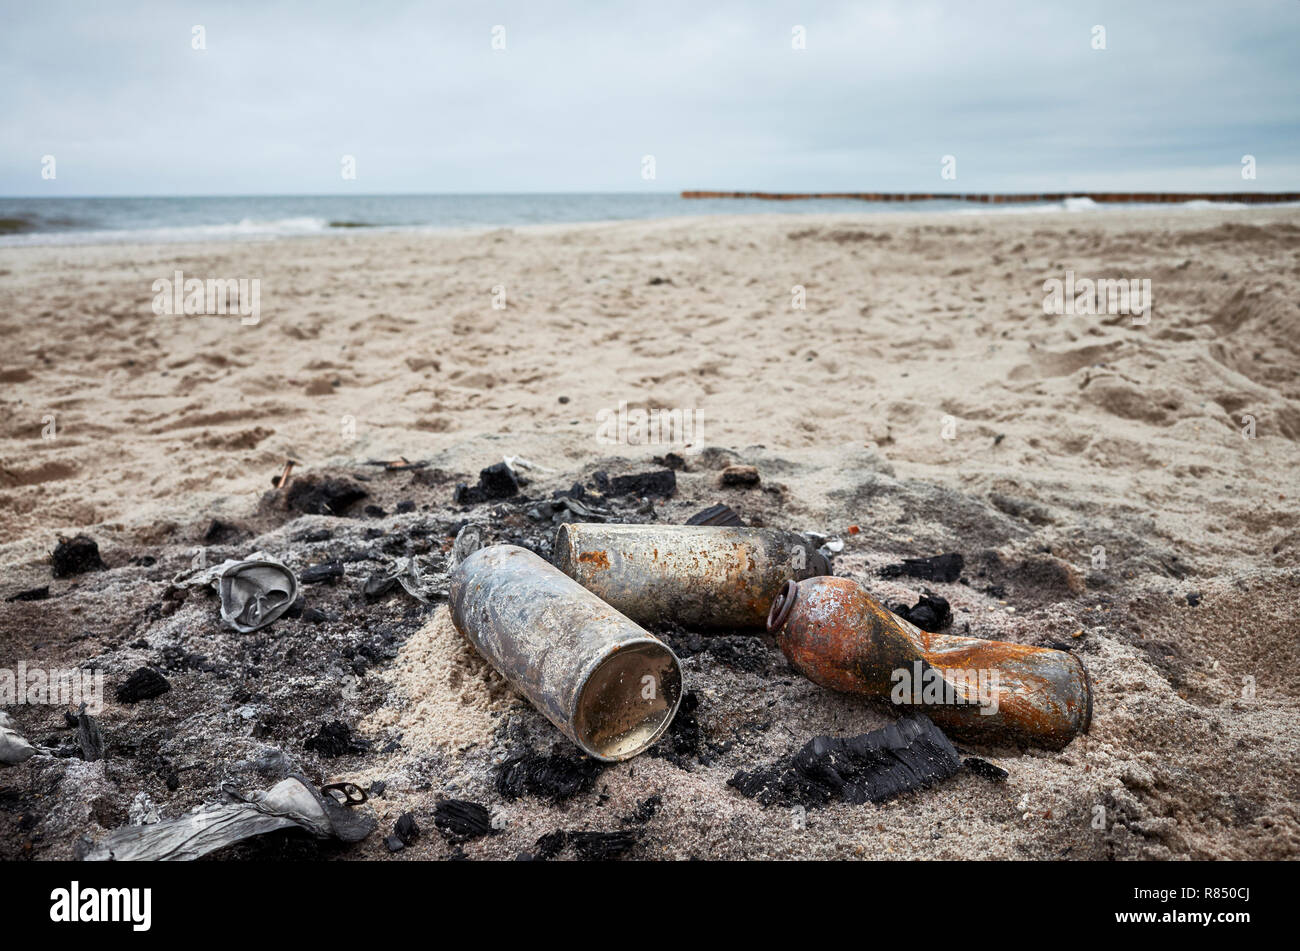 Burnt cans on a beach, environmental pollution concept. Stock Photo